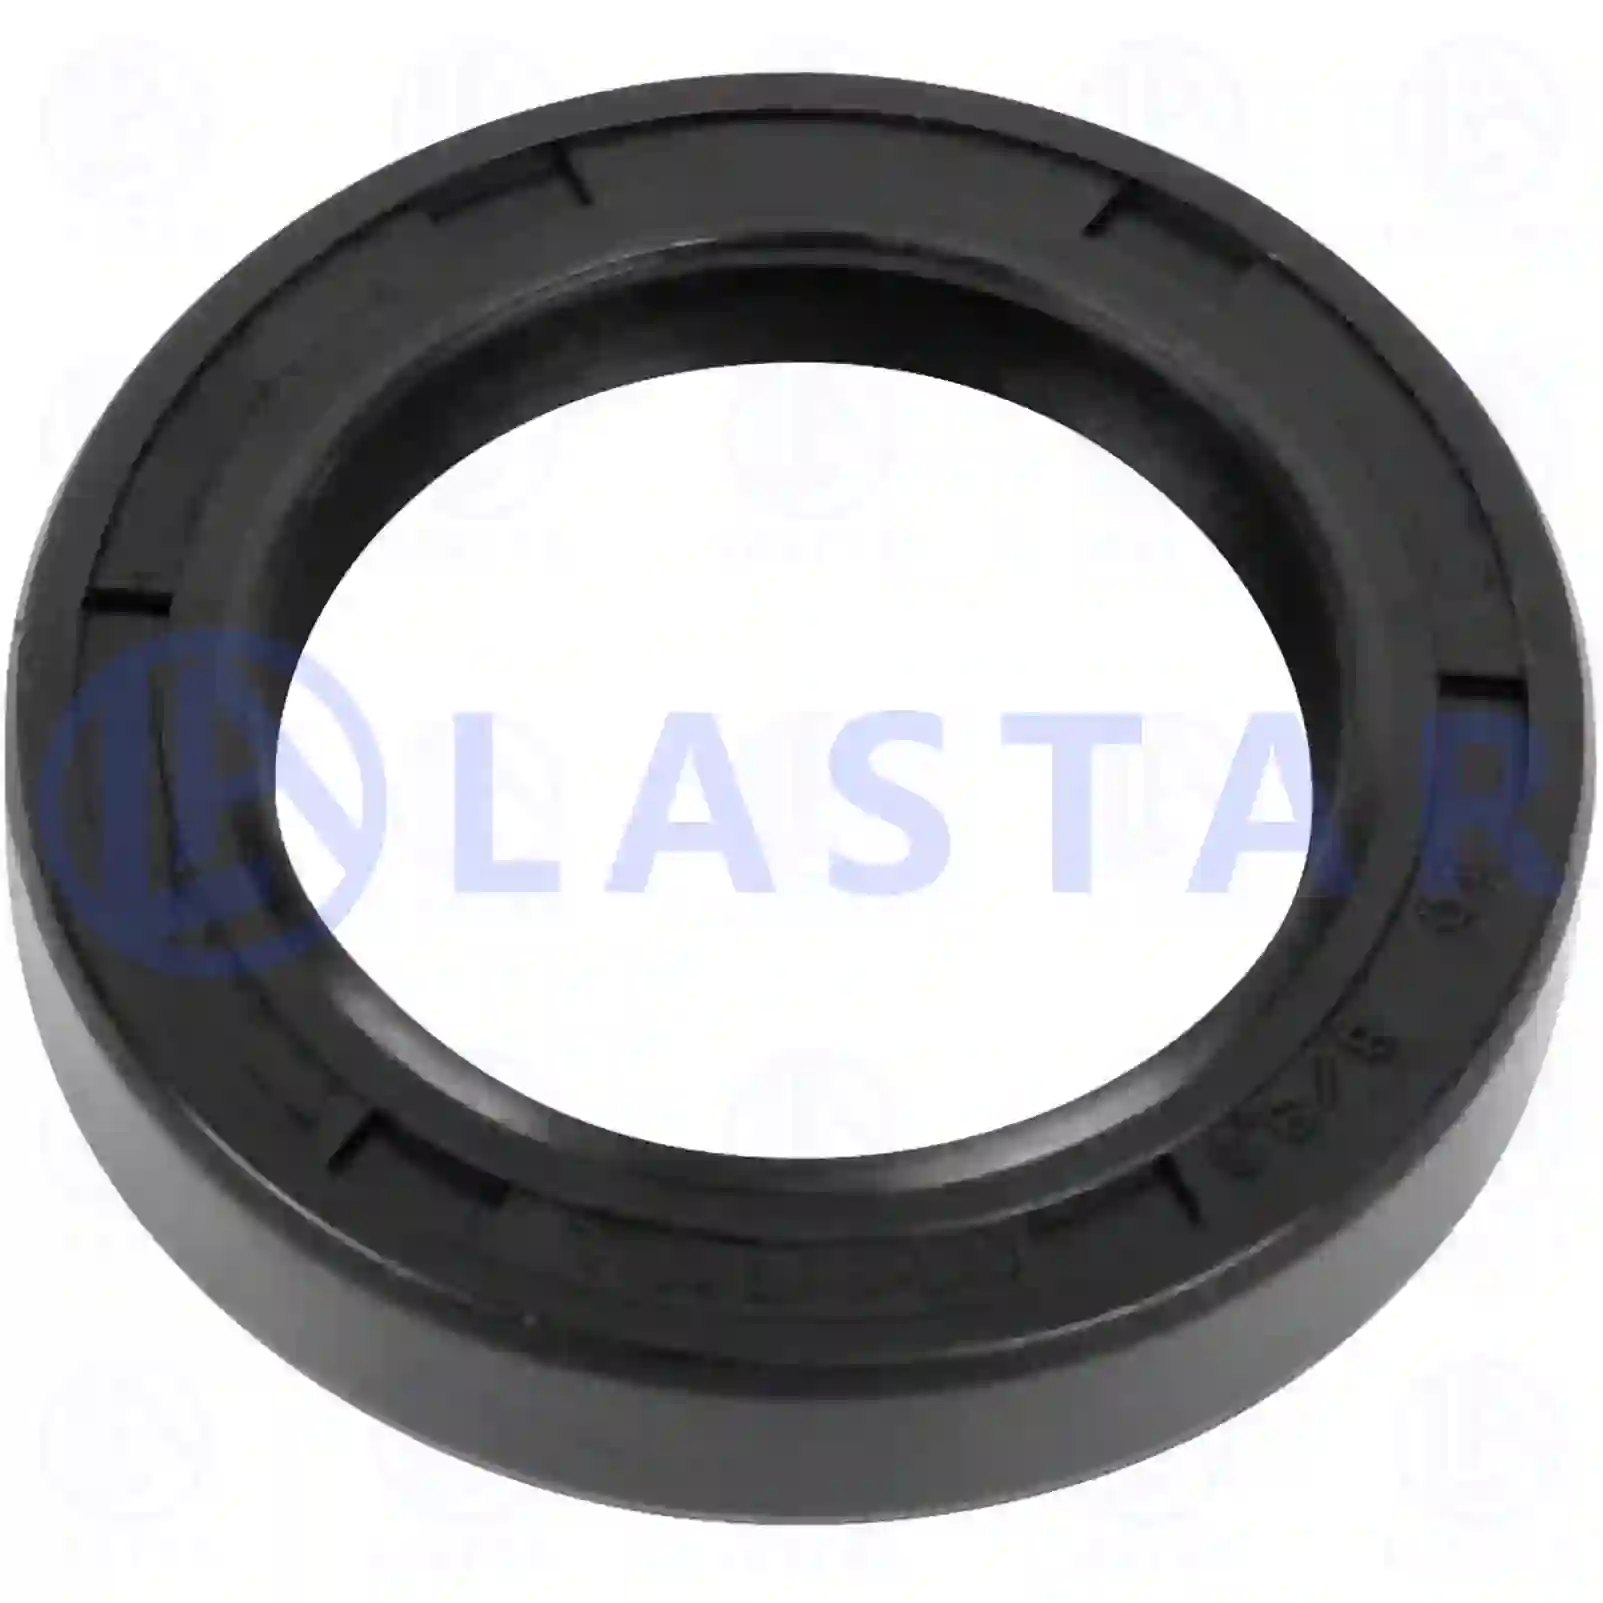 Oil seal, 77705323, 0029974440, 0049976147, 0059974346, 0119977246 ||  77705323 Lastar Spare Part | Truck Spare Parts, Auotomotive Spare Parts Oil seal, 77705323, 0029974440, 0049976147, 0059974346, 0119977246 ||  77705323 Lastar Spare Part | Truck Spare Parts, Auotomotive Spare Parts